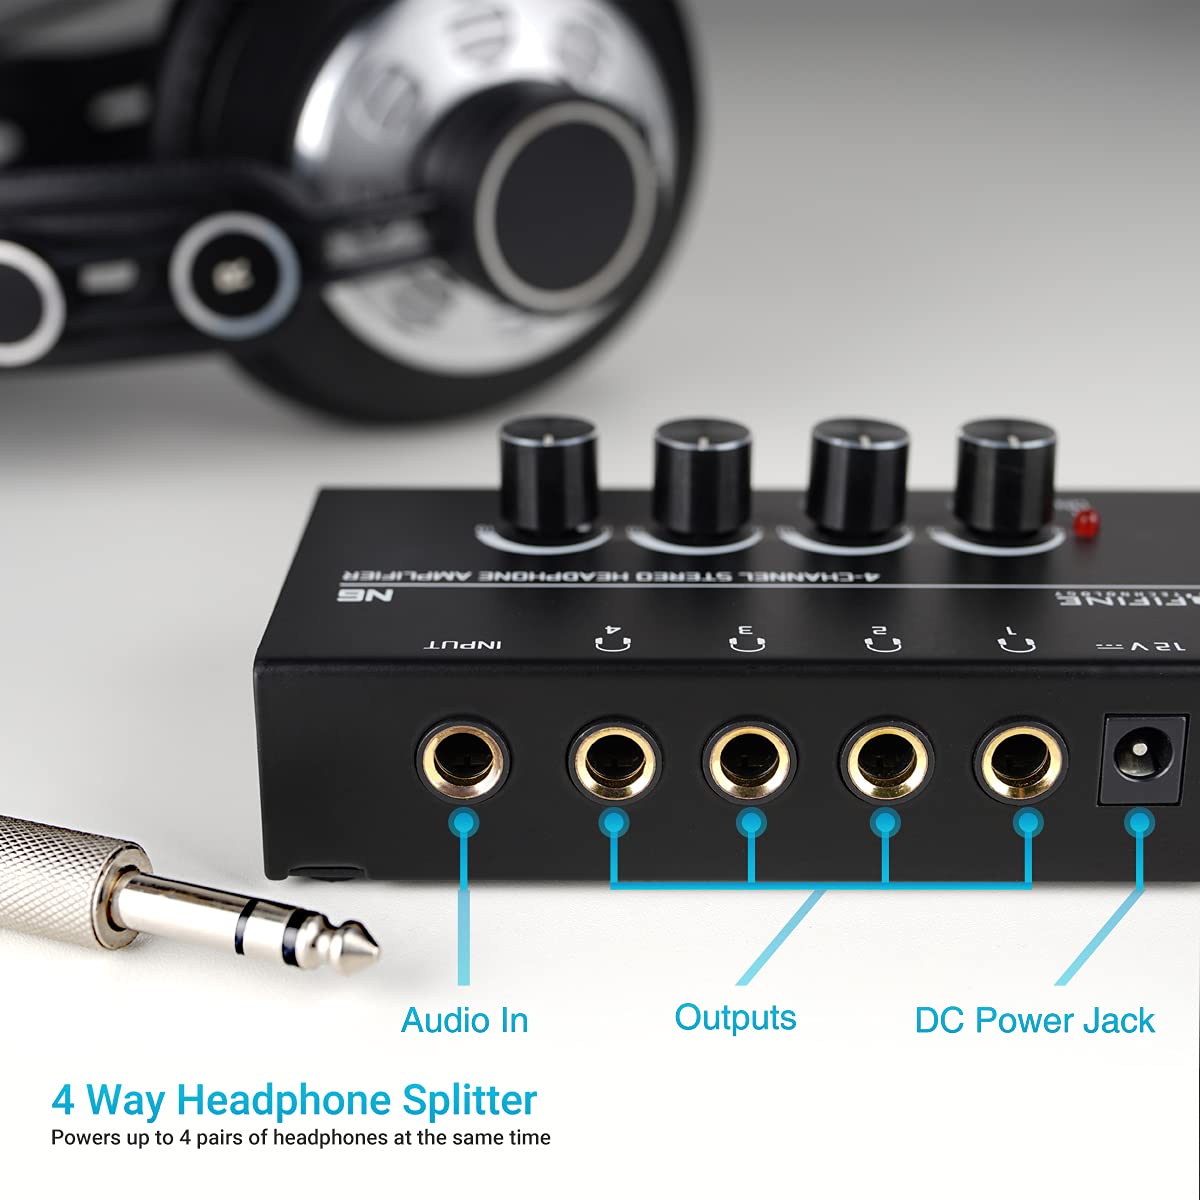 FIFINE N6 - Headphone Amplifier With Stereo Output and Individual Volume Controls